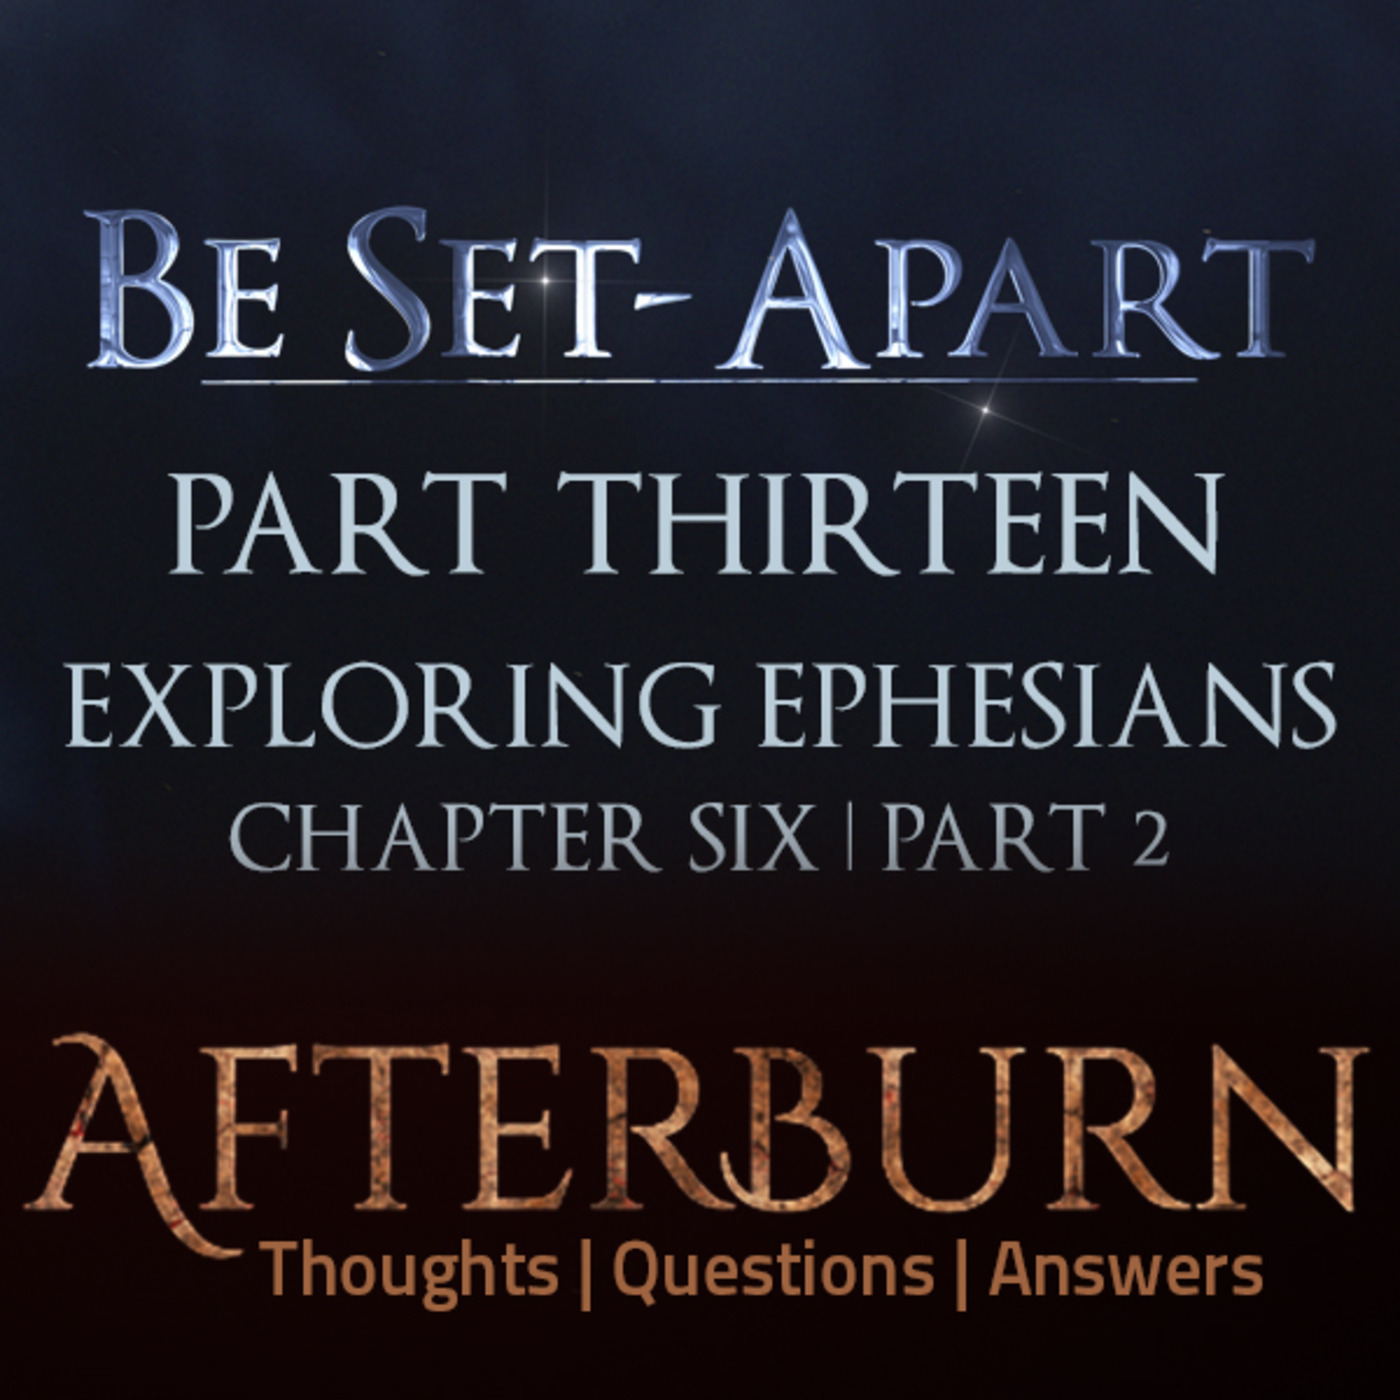 Episode 788: Afterburn | Thoughts, Q&A on Be Set-Apart | Part Thirteen | Exploring Ephesians Chapter Six | Part 2